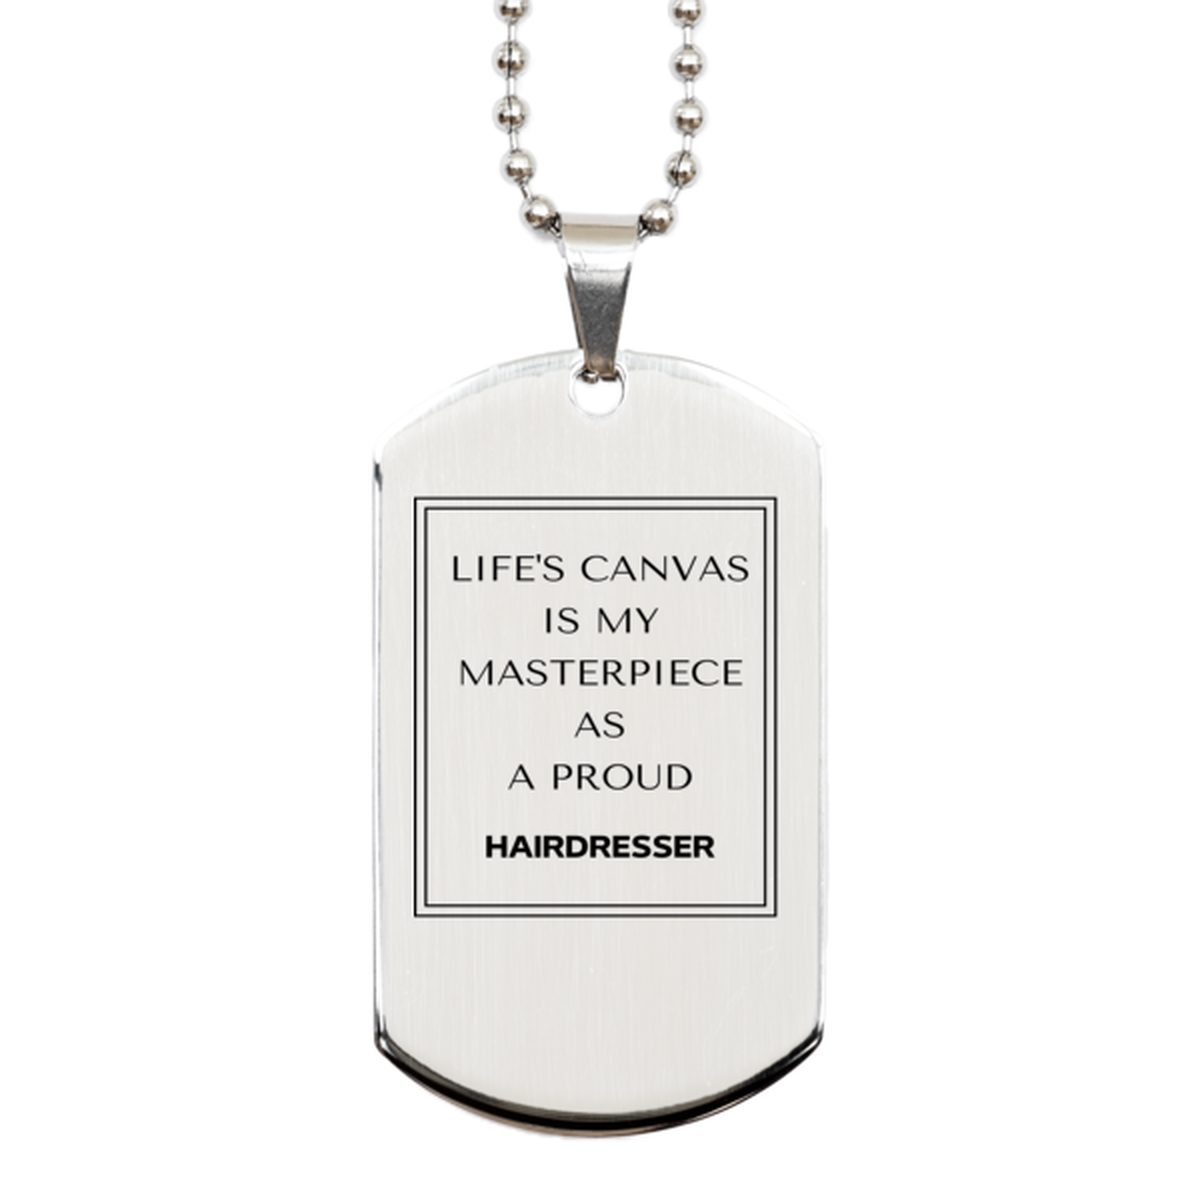 Proud Hairdresser Gifts, Life's canvas is my masterpiece, Epic Birthday Christmas Unique Silver Dog Tag For Hairdresser, Coworkers, Men, Women, Friends